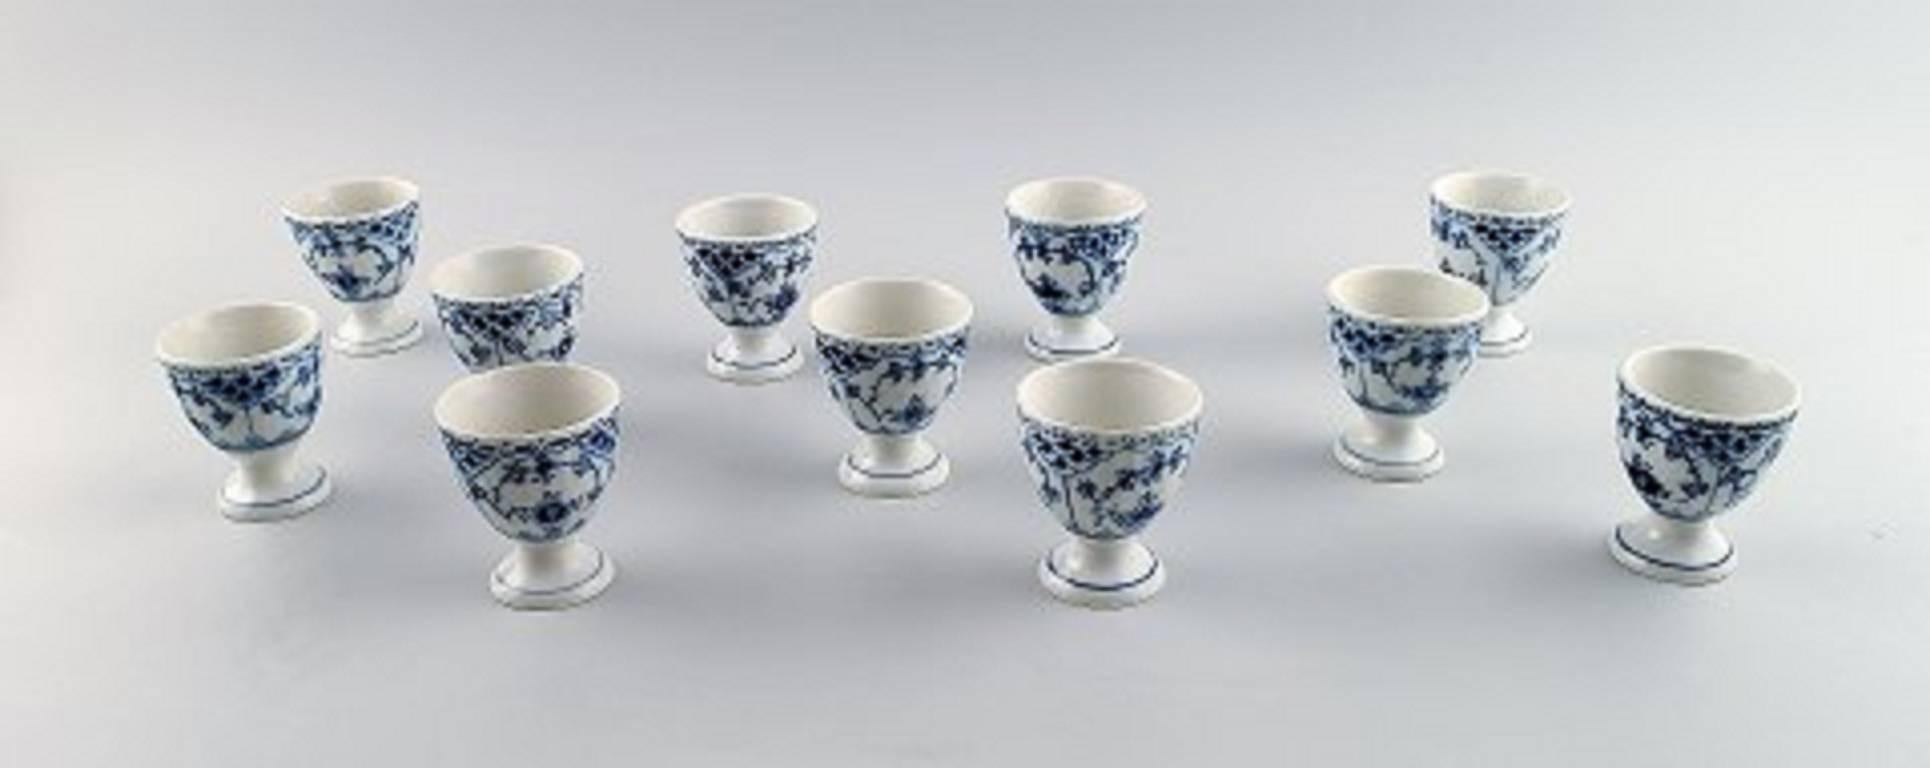 11 Royal Copenhagen blue fluted half lace egg cups.

Produced 1894-1928.

Decoration number 1/542.

1st. factory quality.

Height 5.6 cm.

Perfect condition.